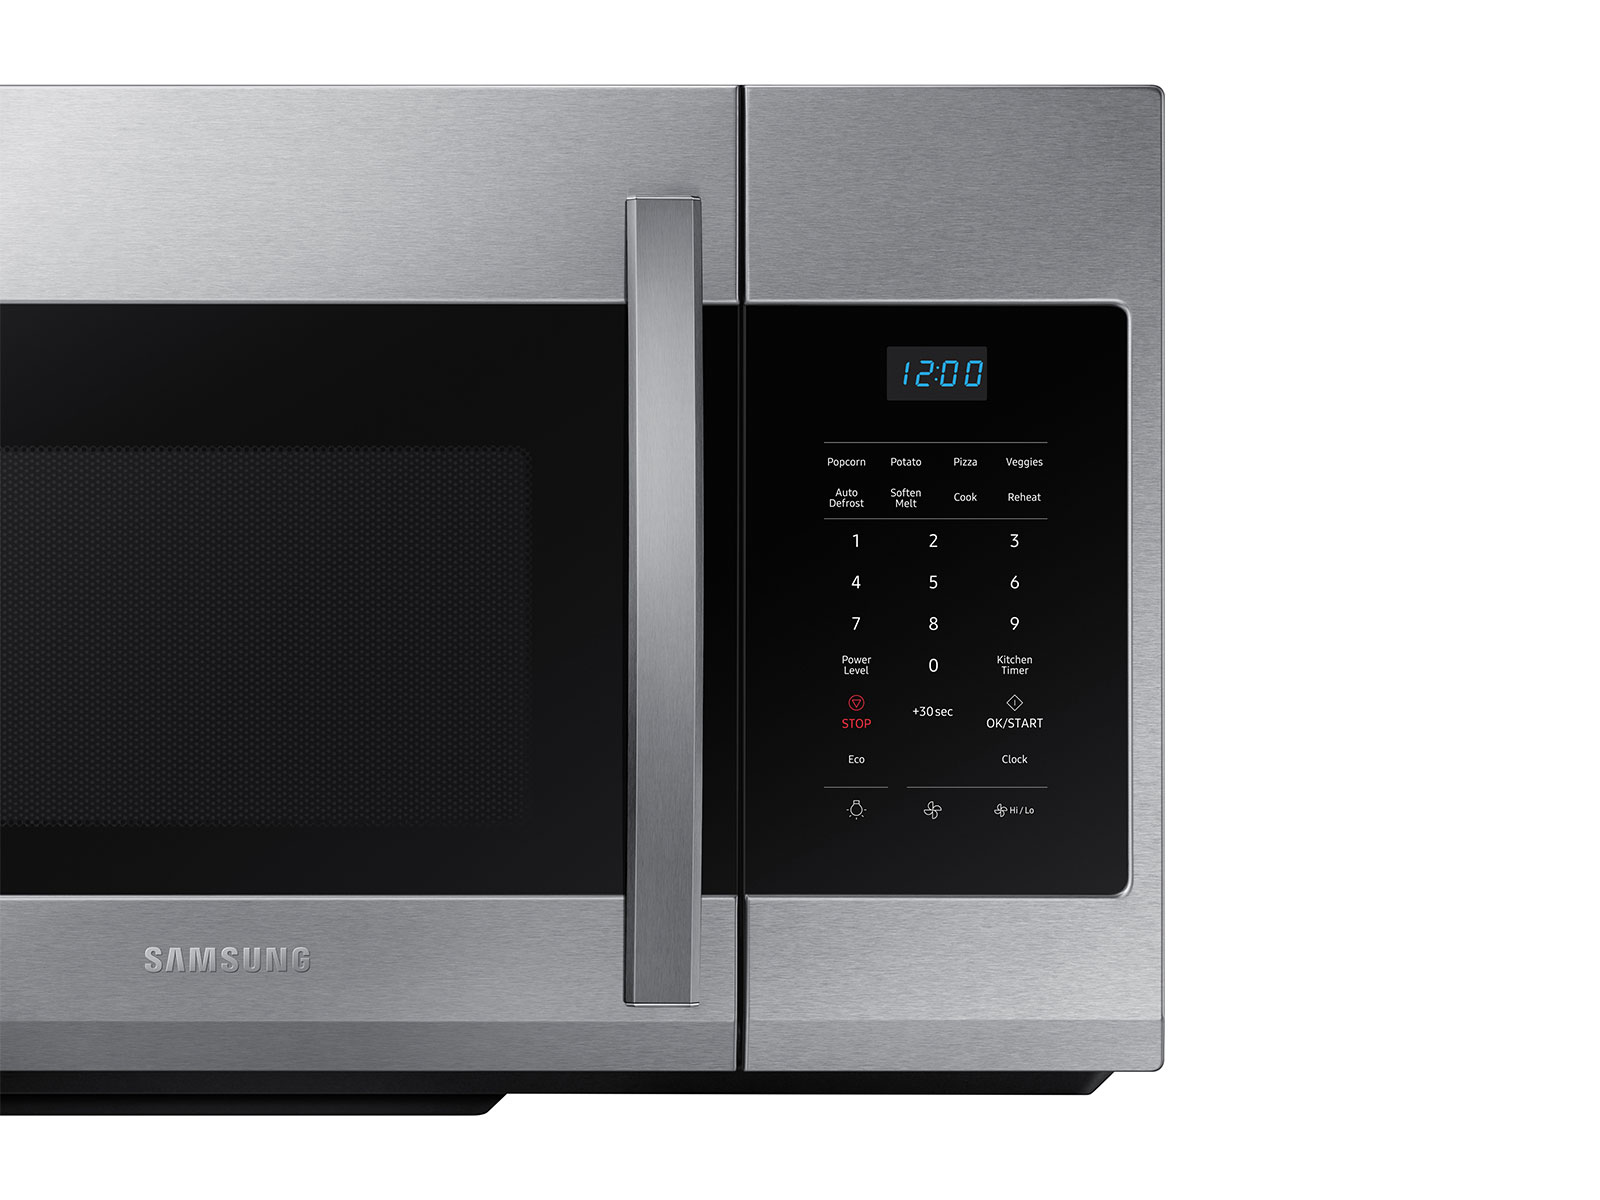 Microwaves For Sale Near You & Online Under $100 - Sam's Club